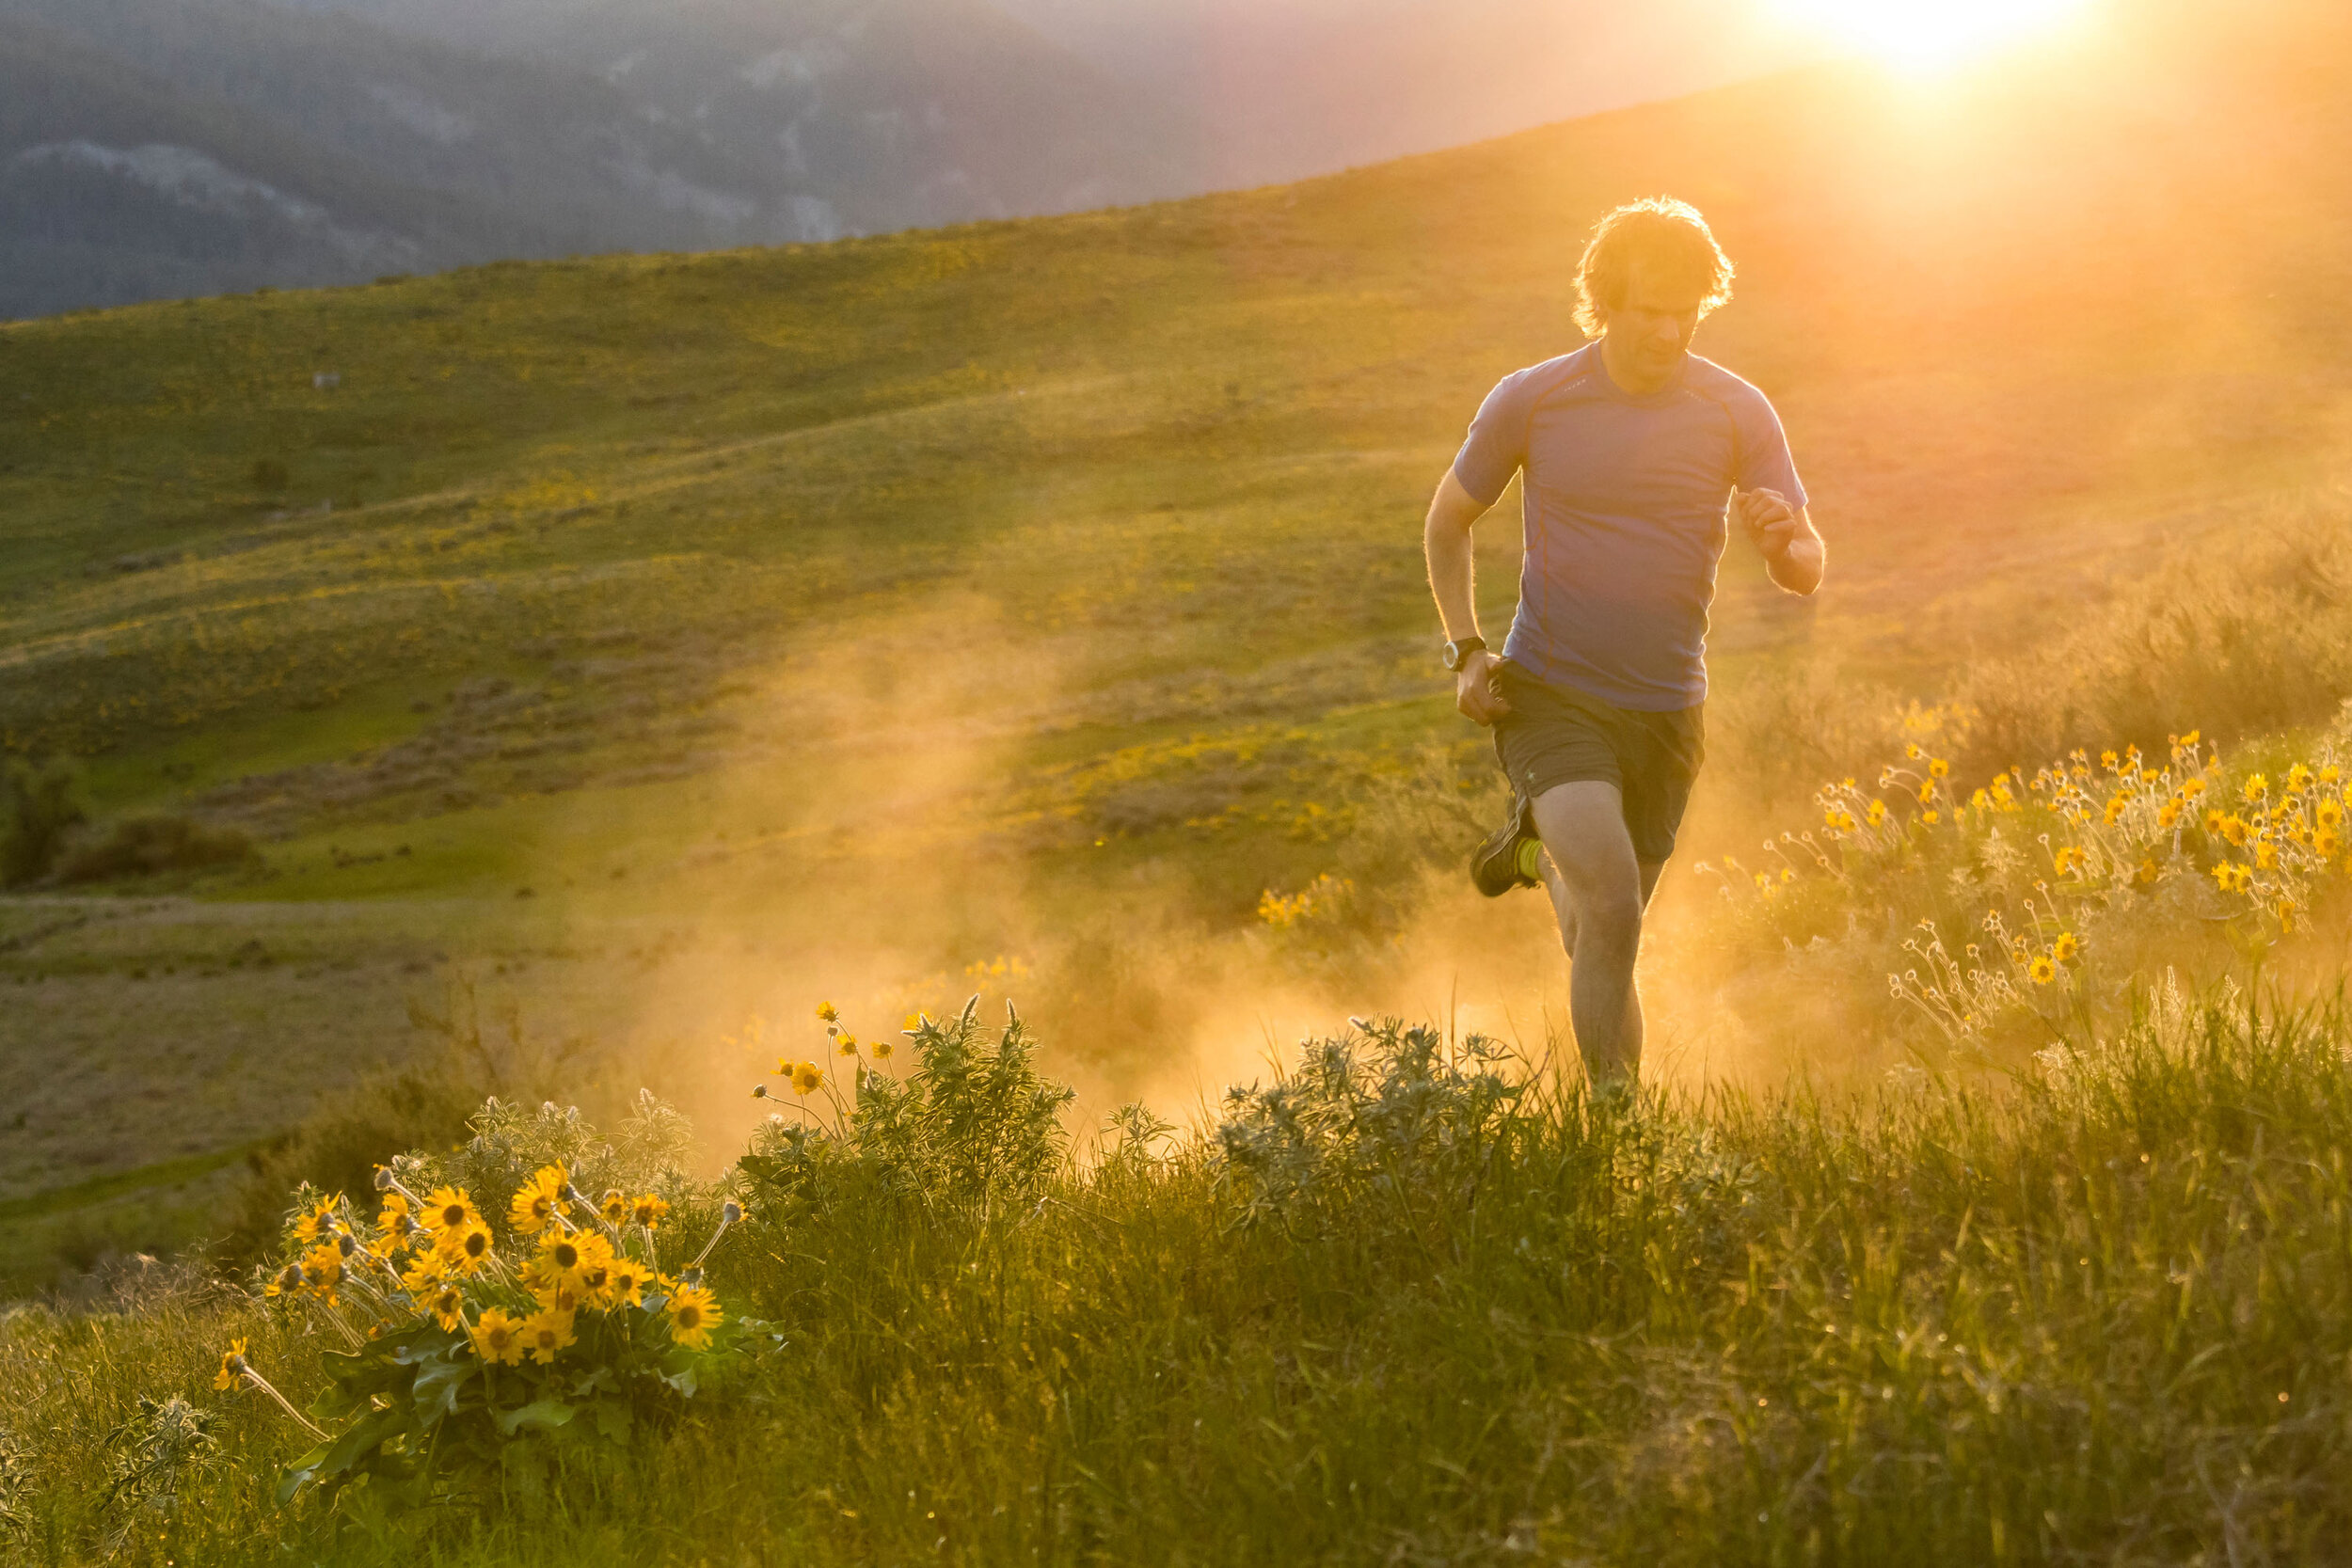  Adventure: Chris Solomon trail running on a ddry, dusty evening in the Methow Valley in spring, Washington 